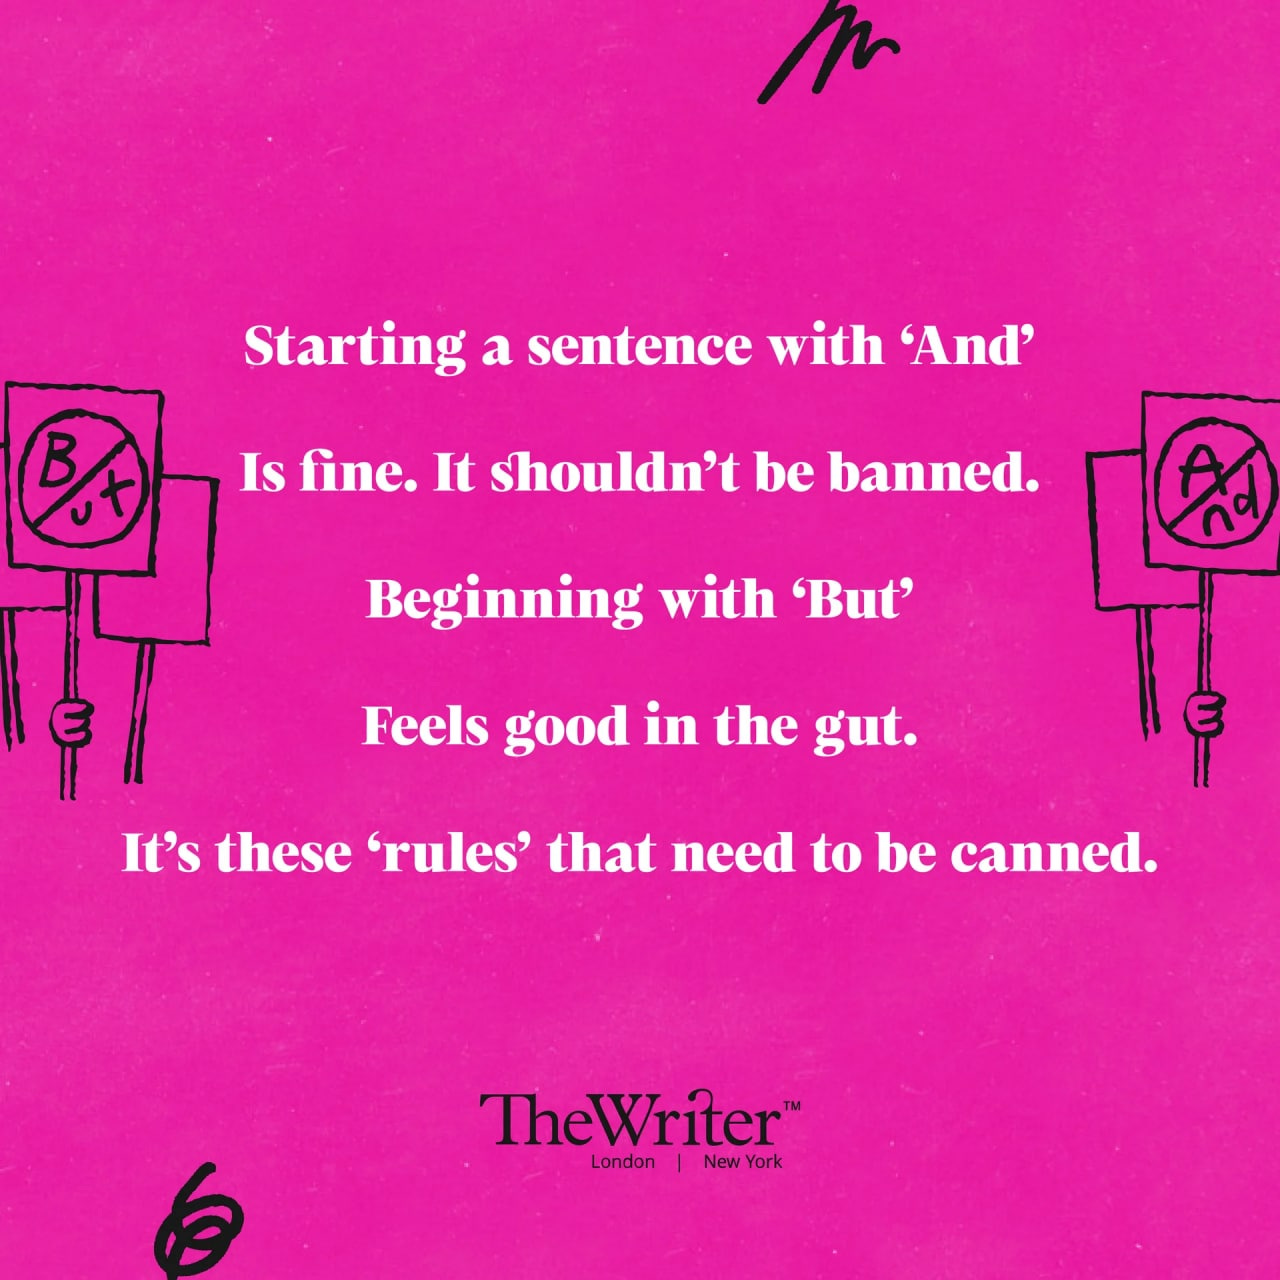 Starting a sentence with ‘And’ Is fine. It shouldn’t be banned. Beginning with ‘But’ Feels good in the gut. It’s these rules that need to be canned.